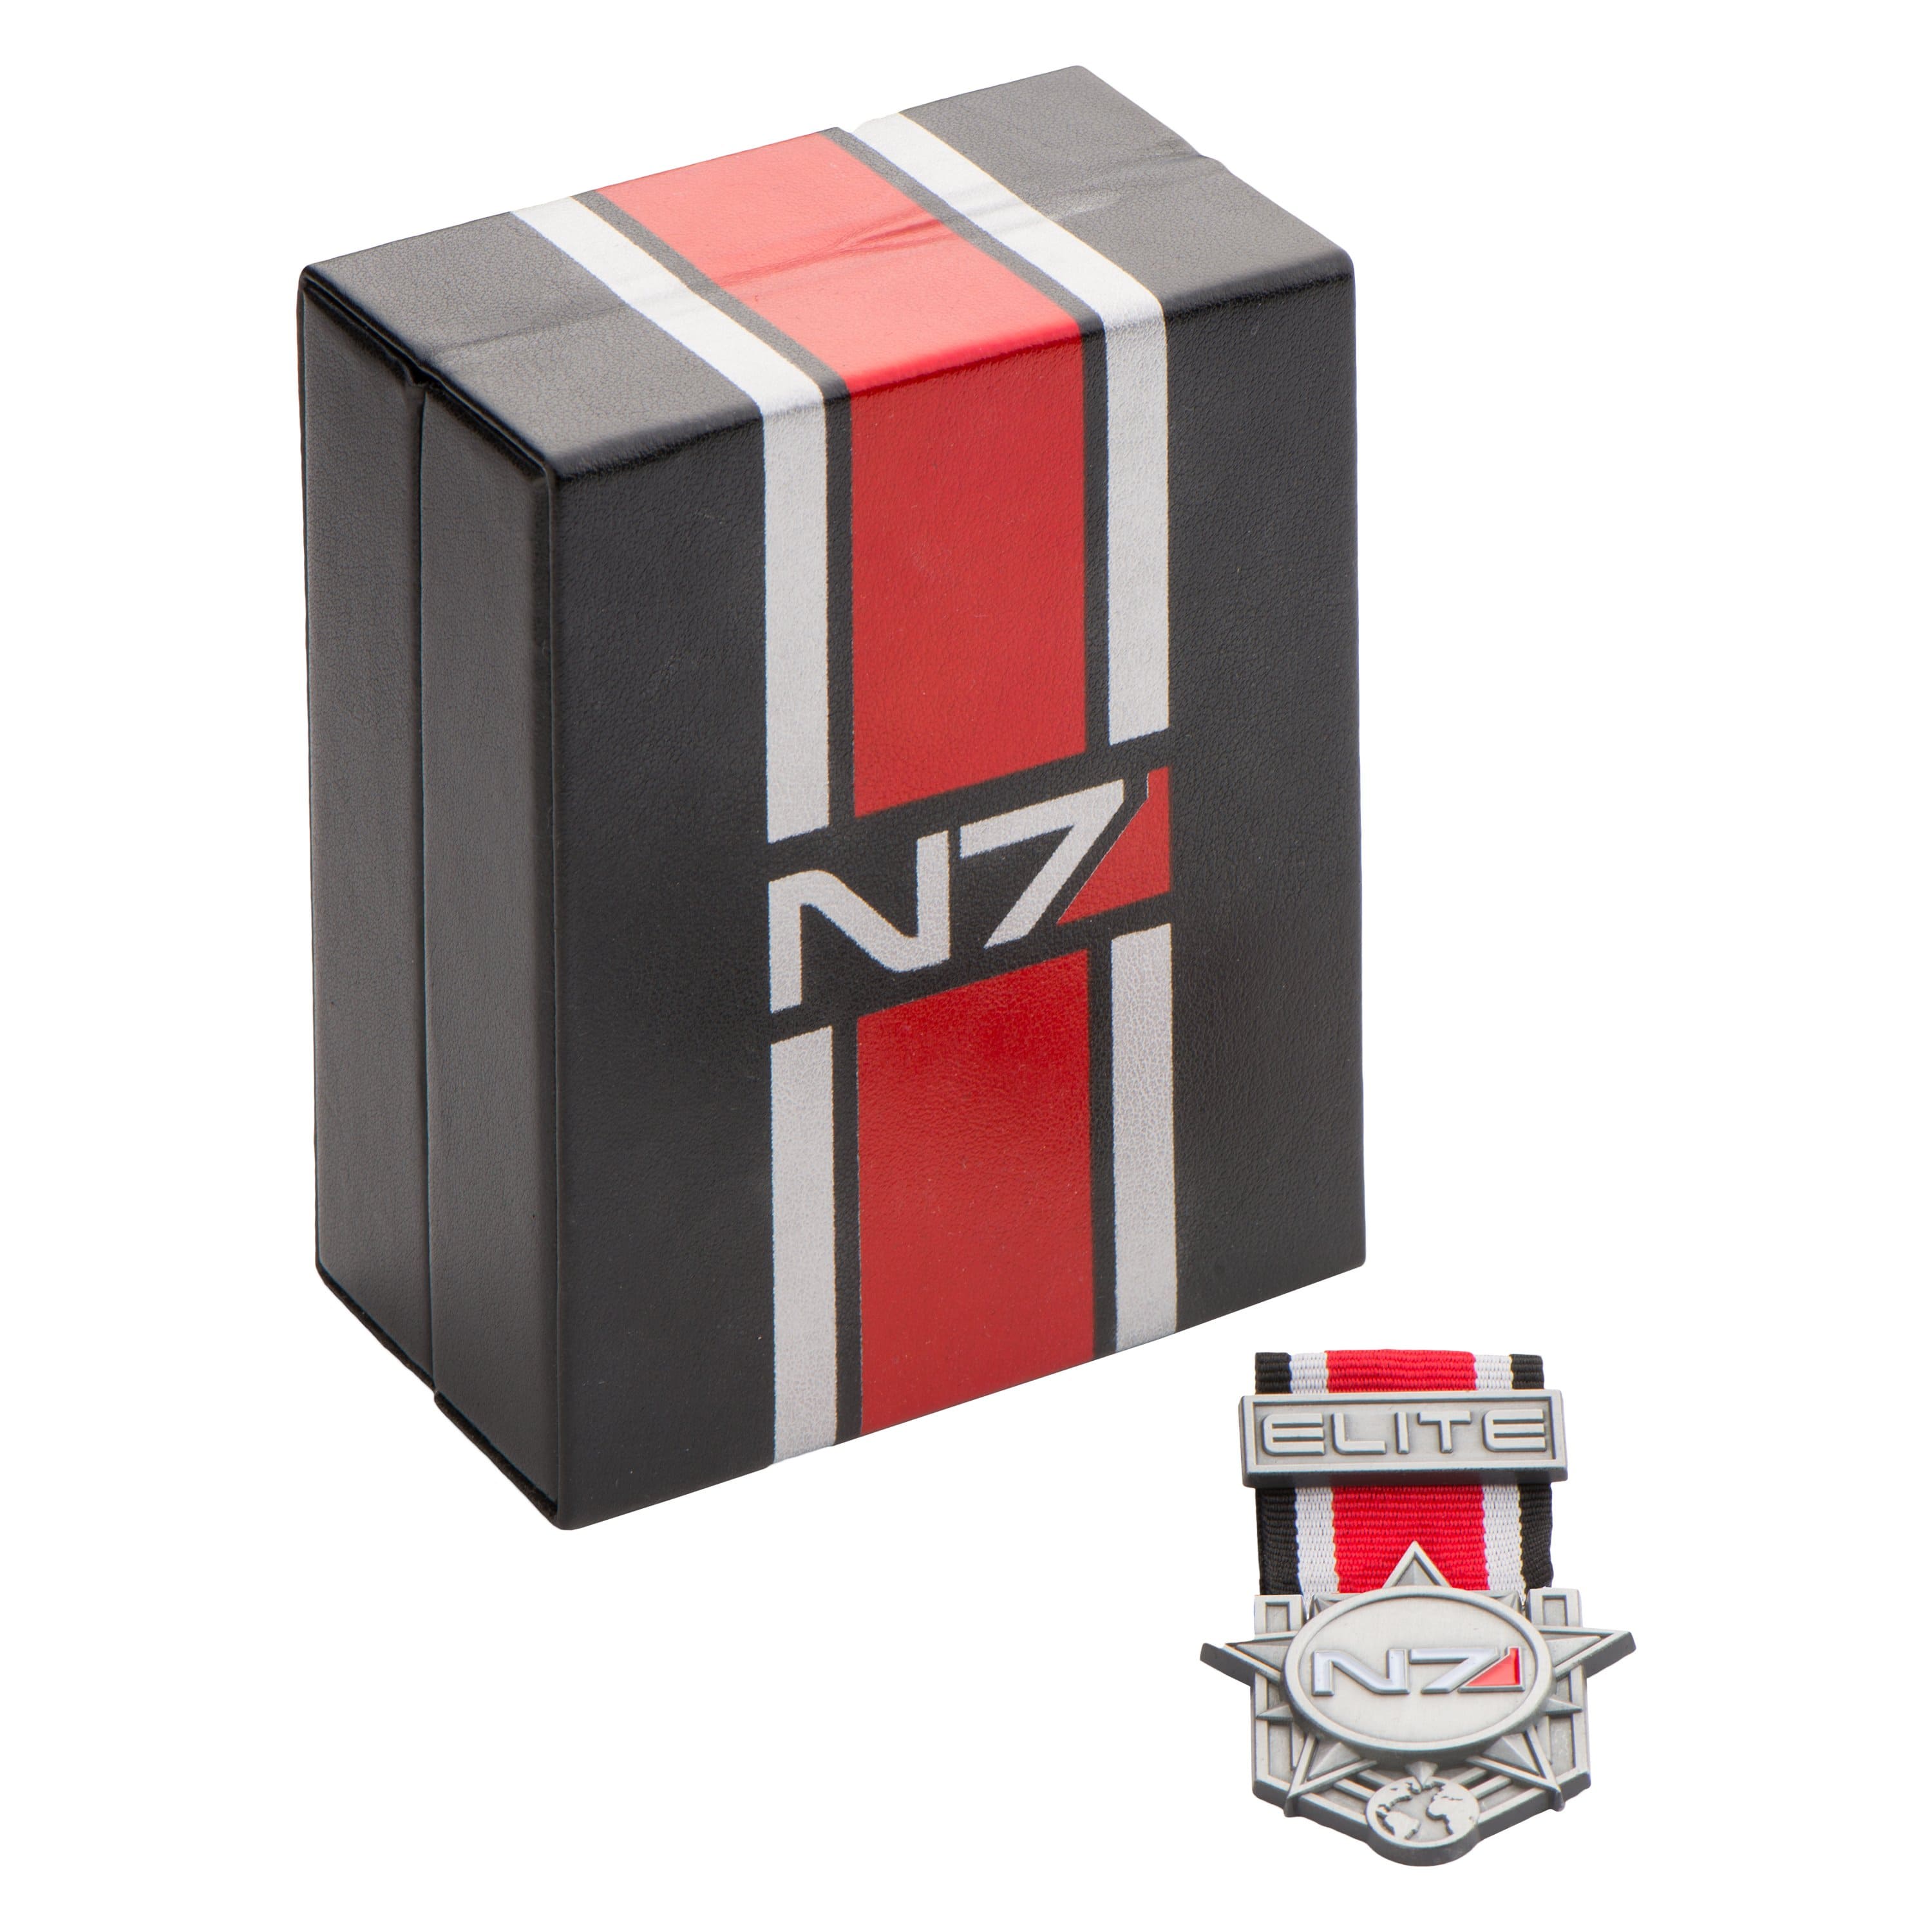 Best Link Mass Effect Medals Ice Tray Set